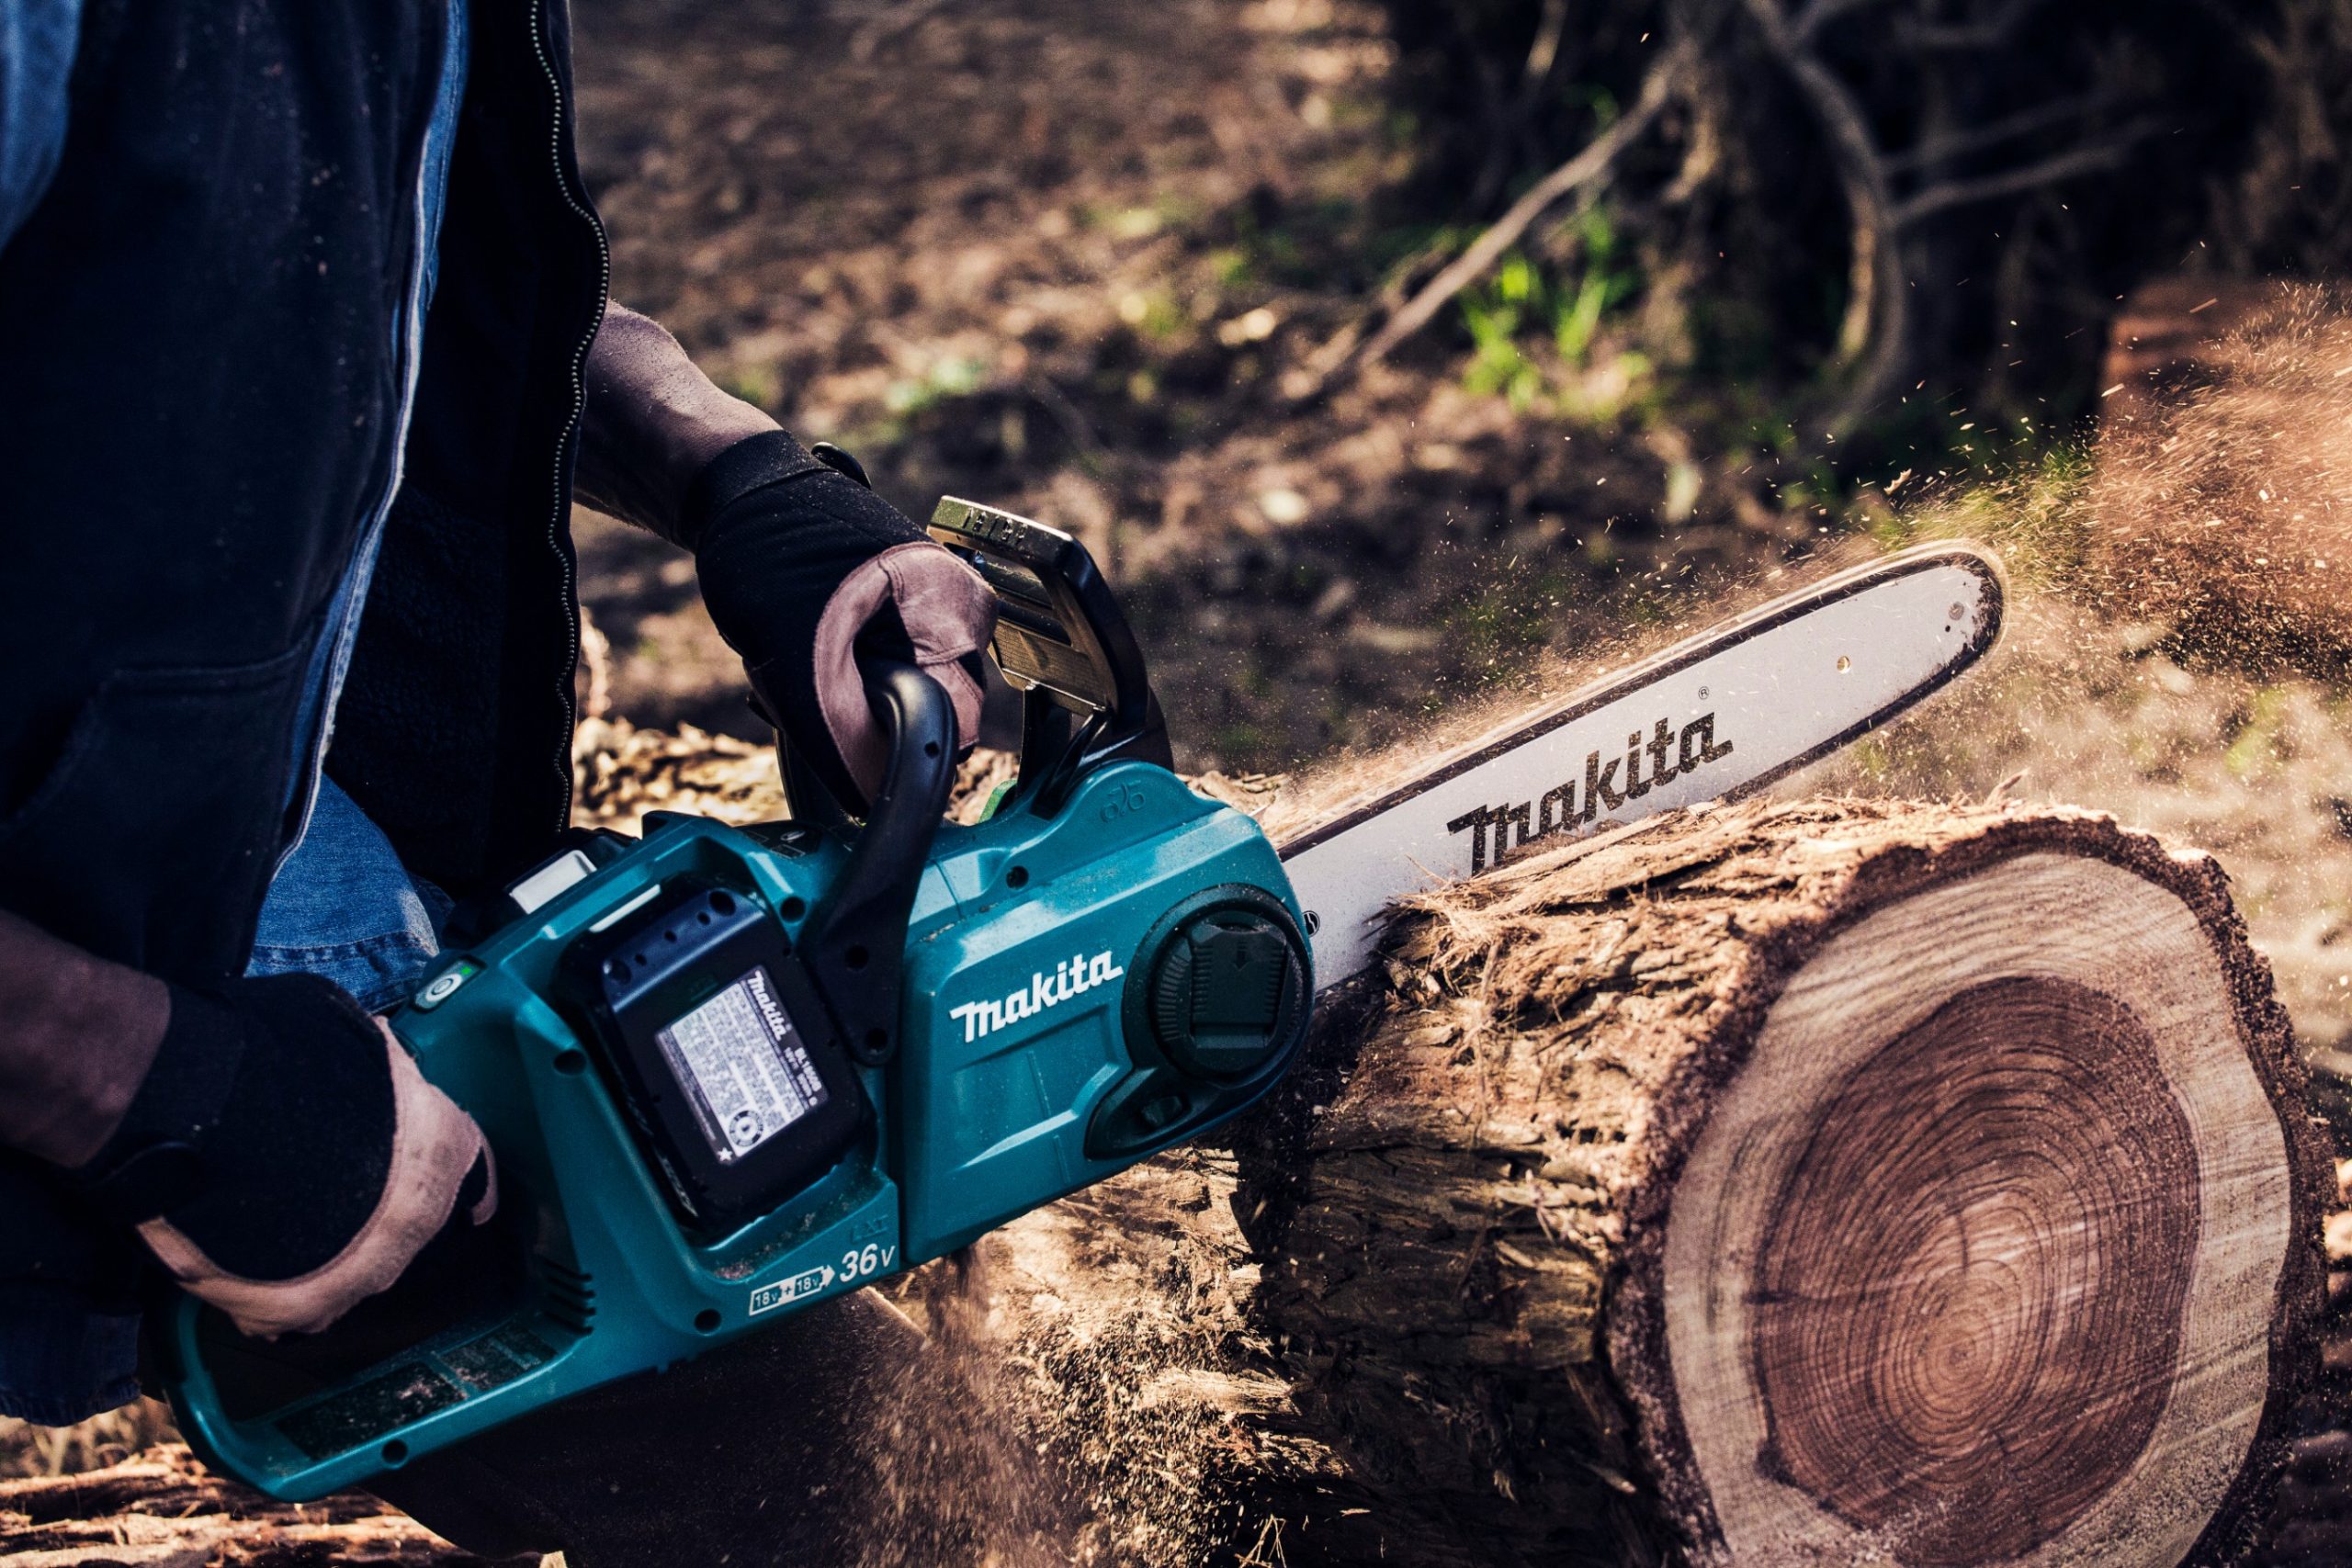 A Short Guide for Buying Outdoor Power Tools